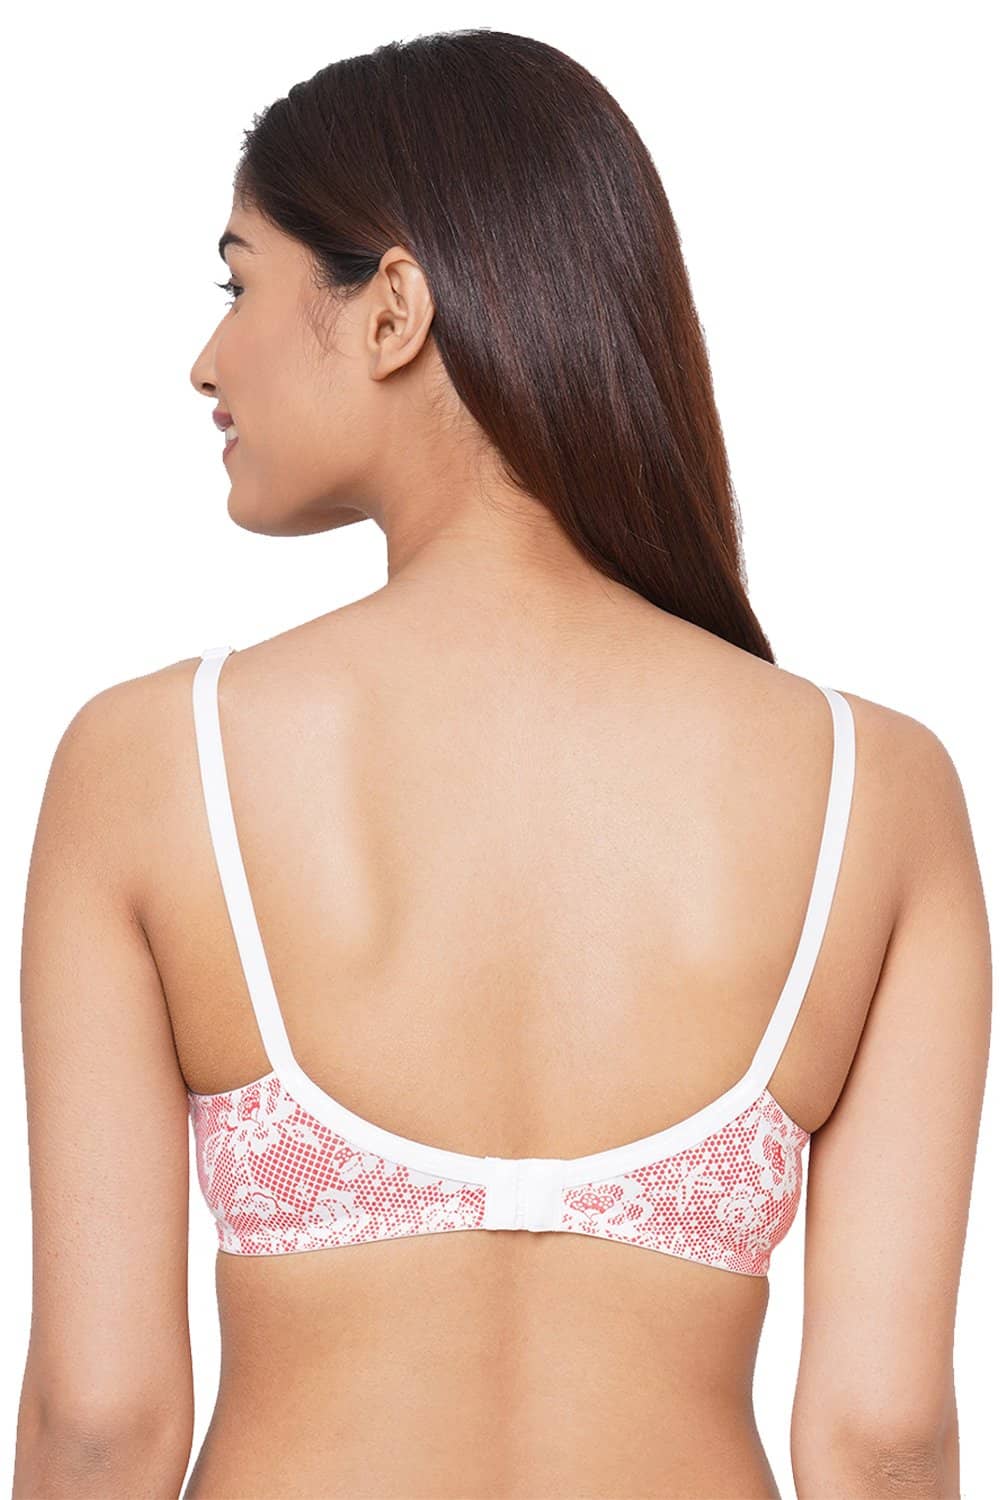 Intimissimi cream lace bra Size undefined - $35 New With Tags